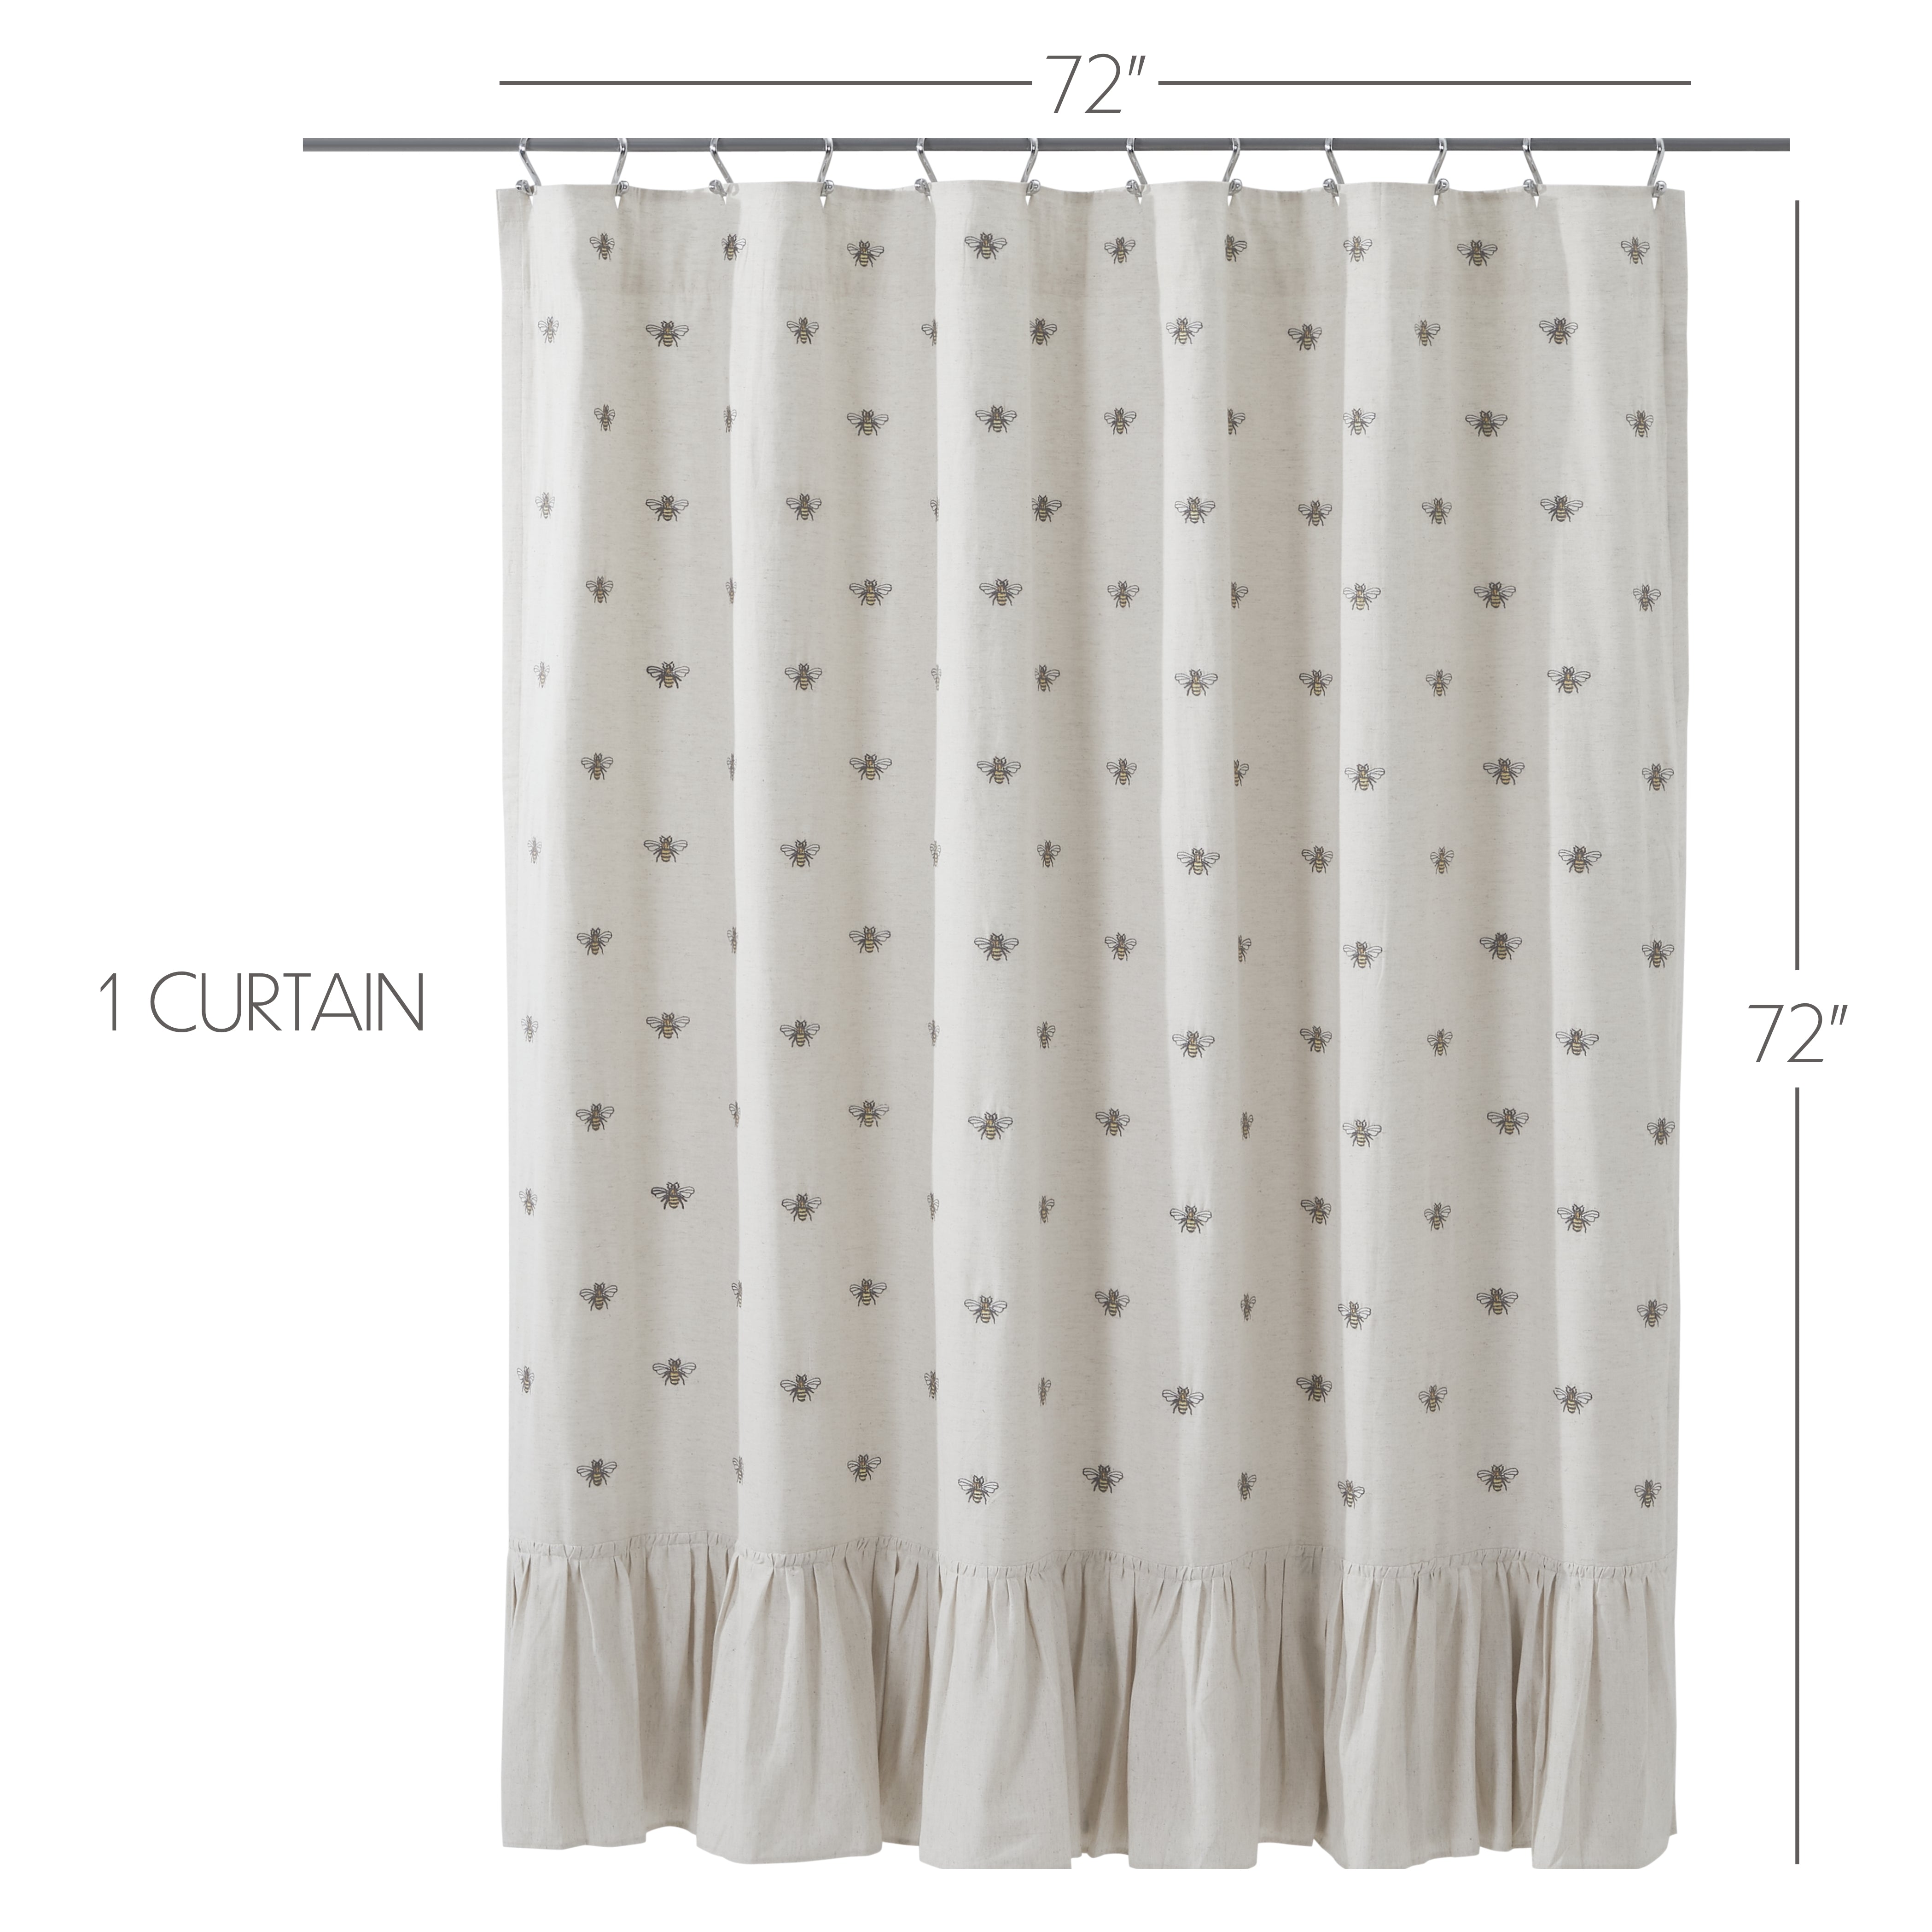 https://allysonsplace.com/cdn/shop/products/Embroidered_20Bee-_20Shower_20Curtain_2072x72_20Infographic_201.jpg?v=1646931900